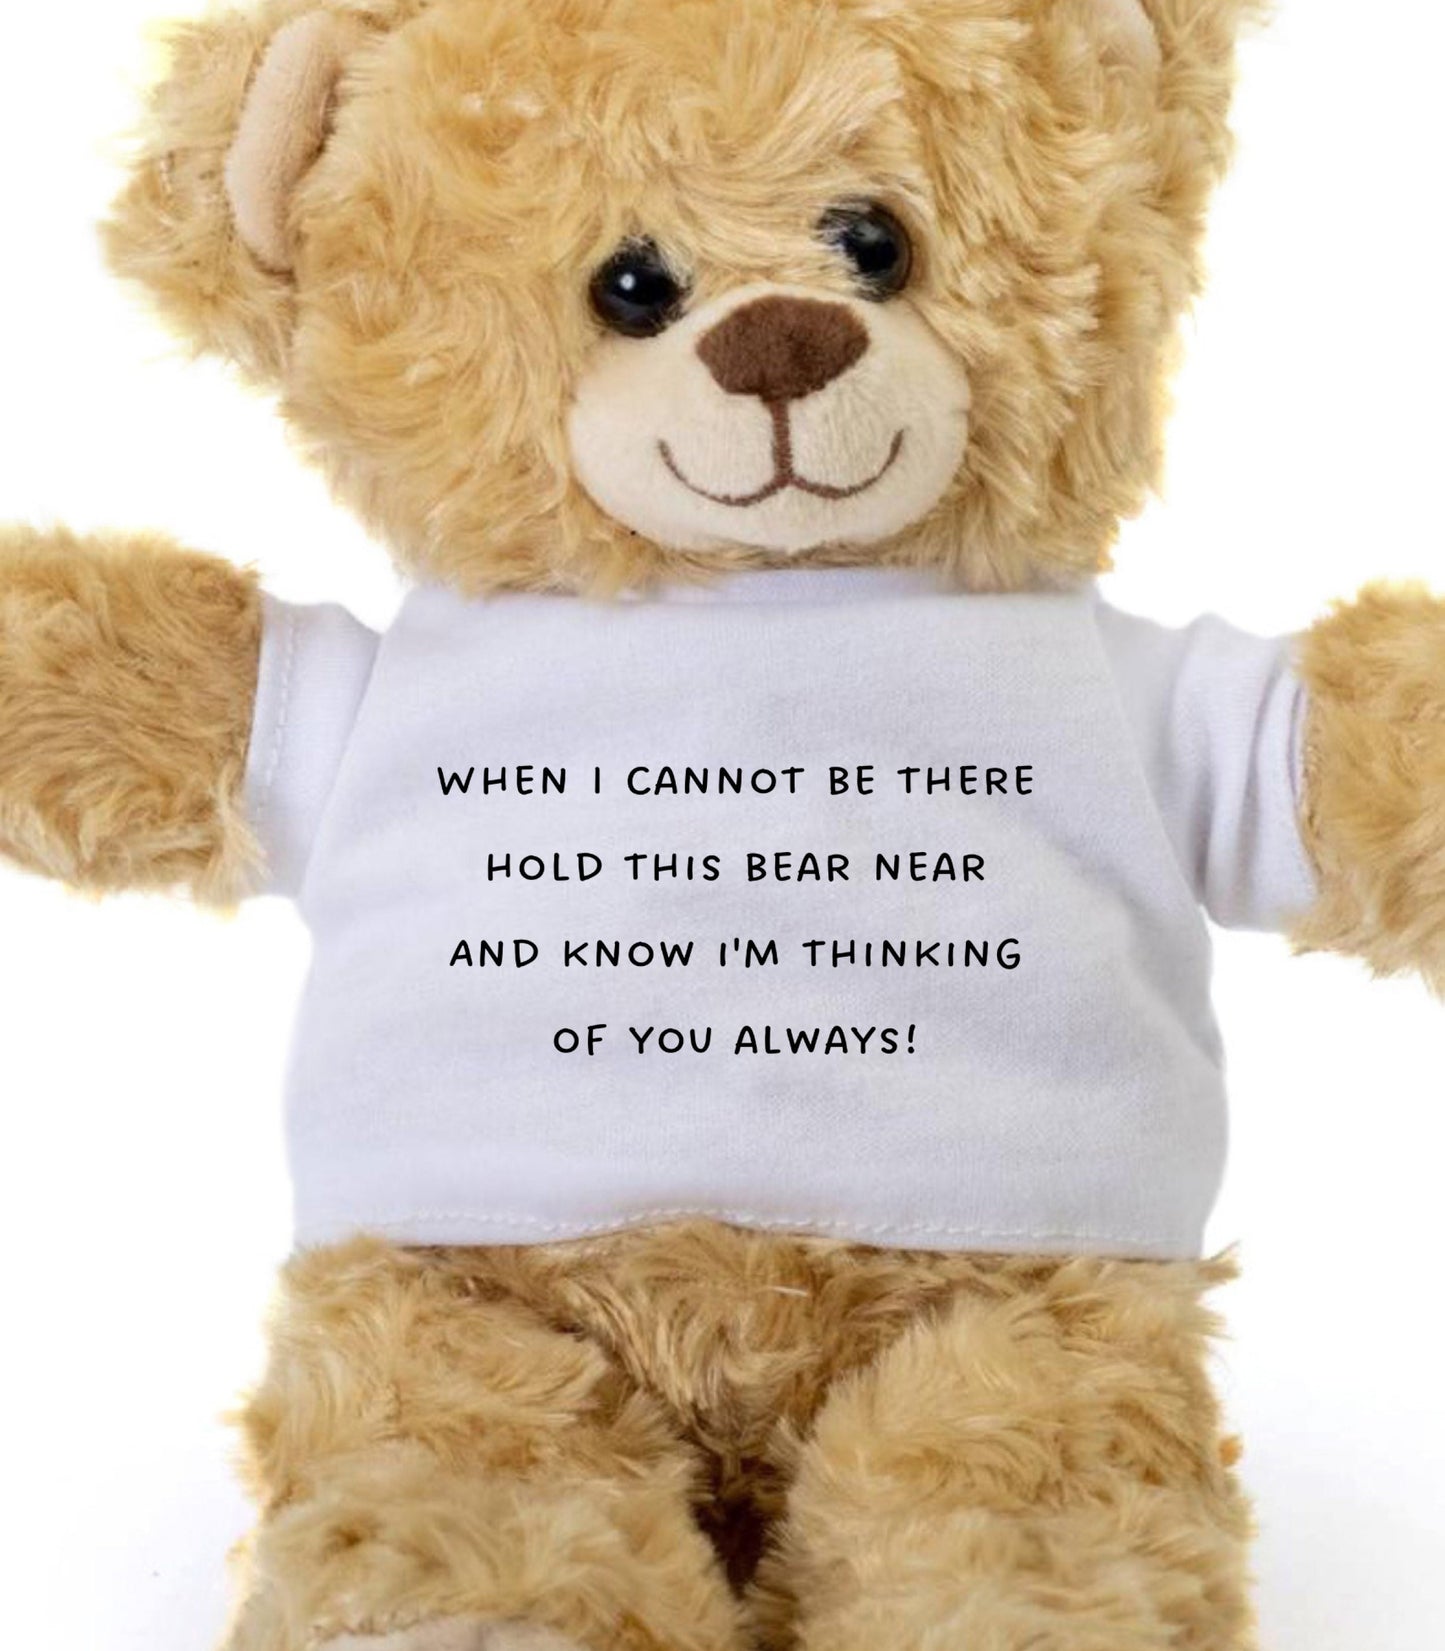 Thoughtful Miss You Gift - Cuddly Teddy Bear to Remind Them of Your Love, Going Away Gift, Miss You Gift, Miss You Teddy Bear, For Boyfriend